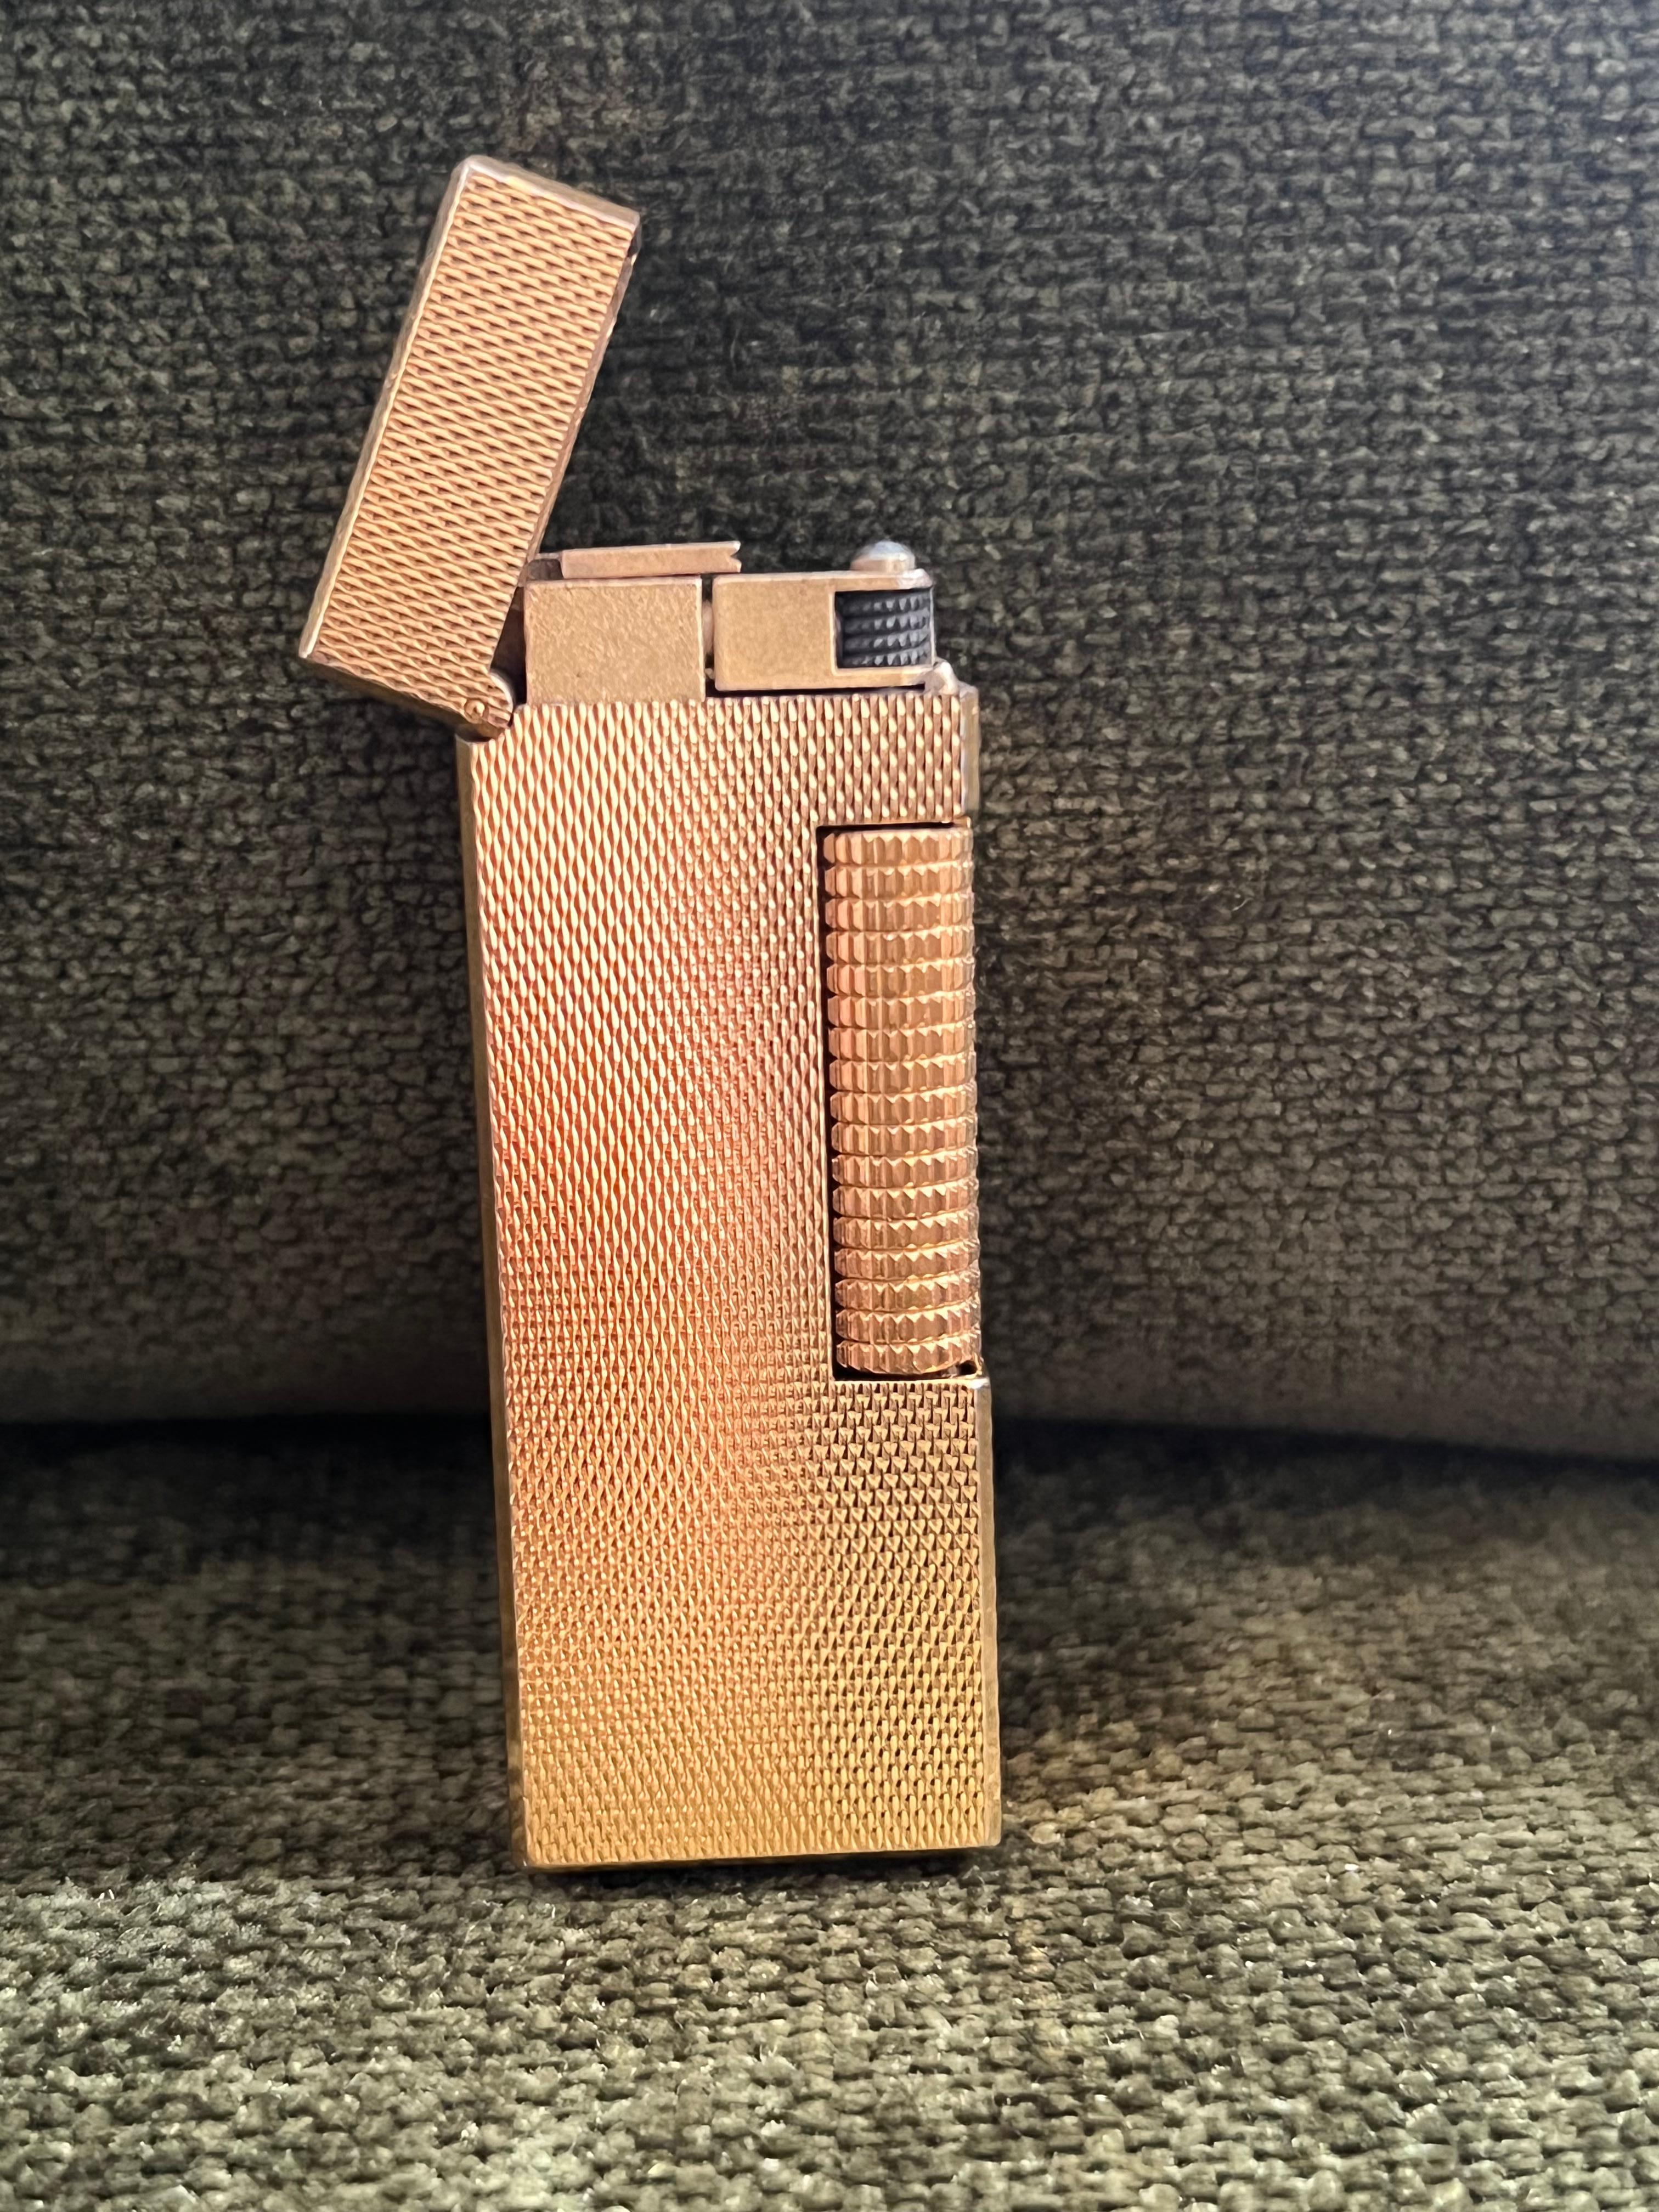 The James Bond Iconic and Rare Vintage Dunhill Gold and Swiss Made Lighter 3